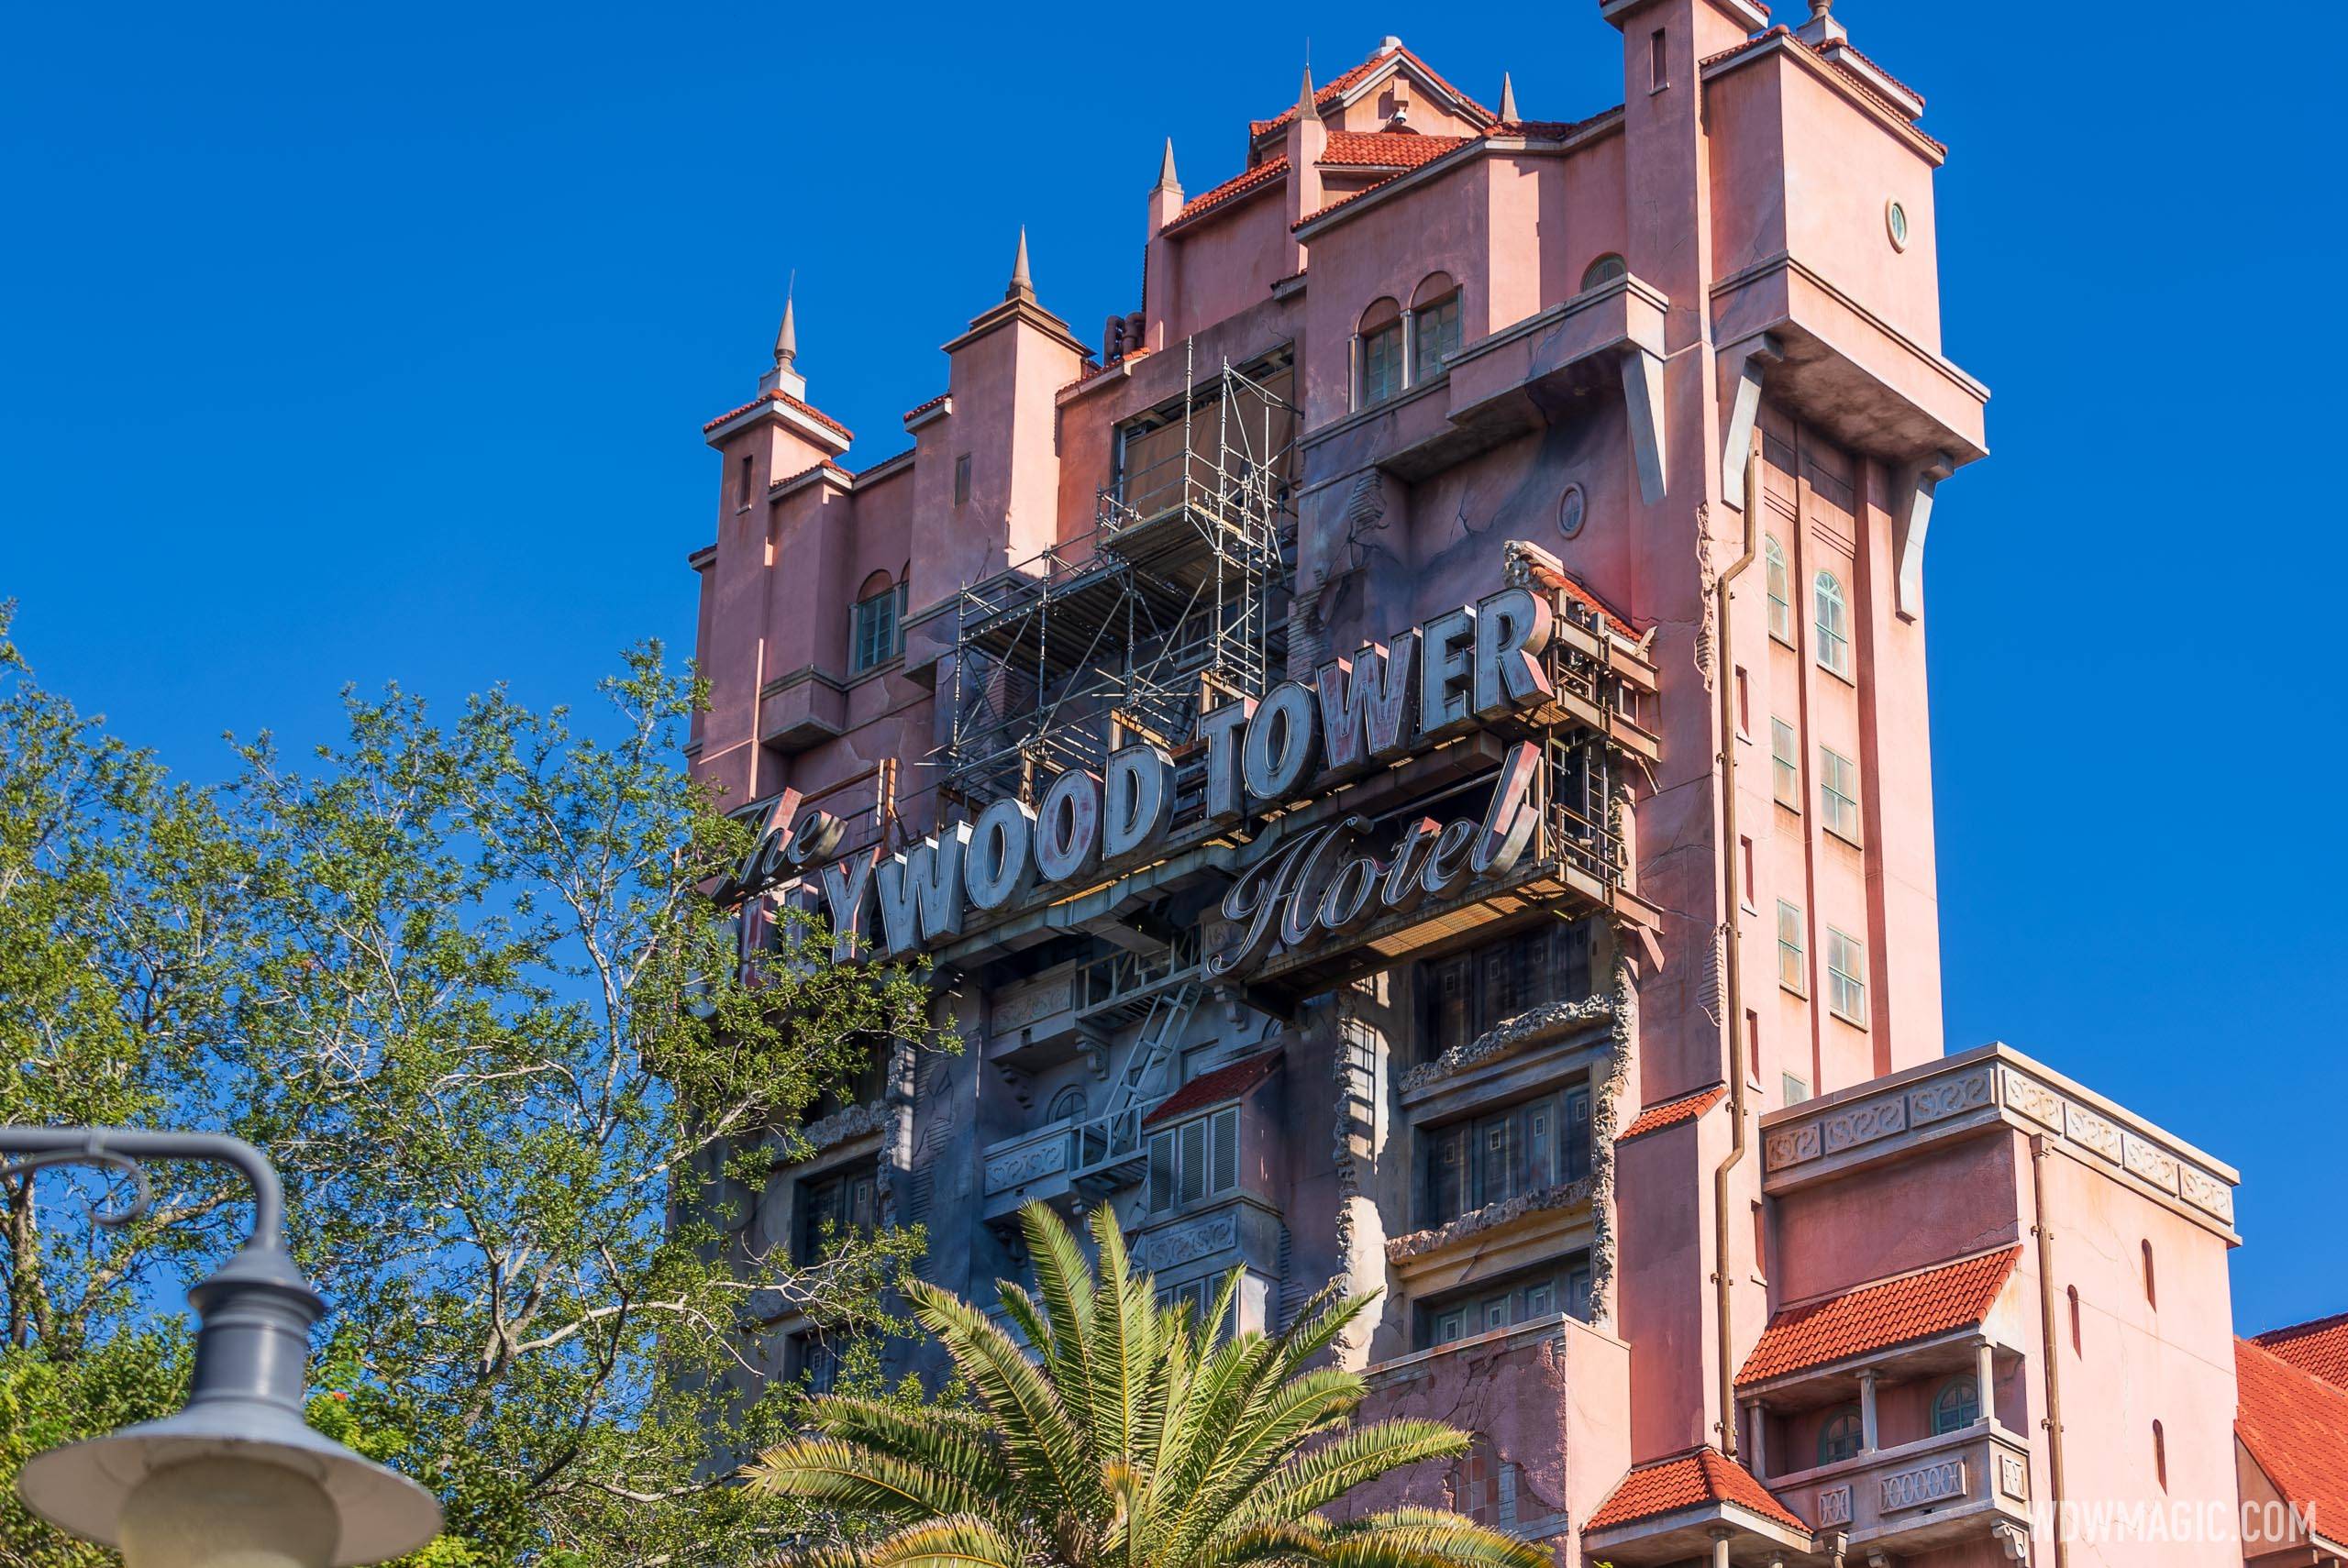 Tower of Terror closed for maintenance November 3 2021